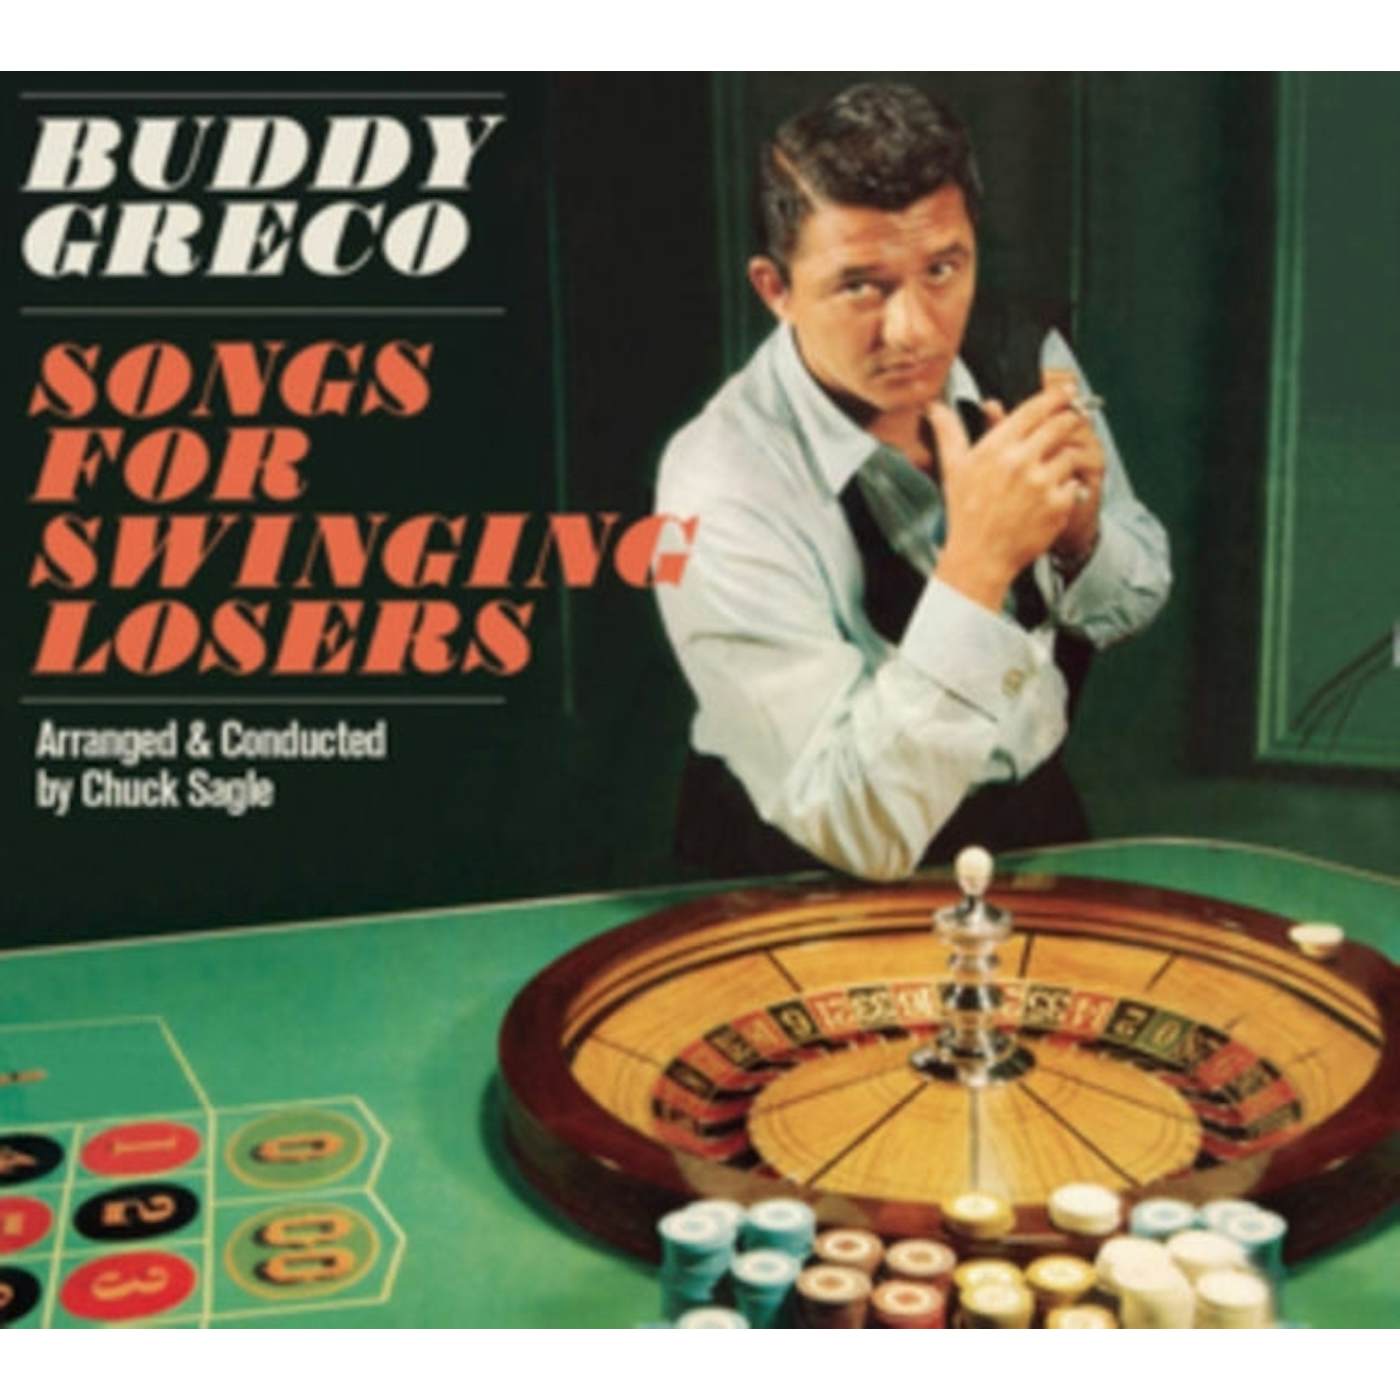 Buddy Greco CD - Songs For Swinging Losers / Buddy Greco Live